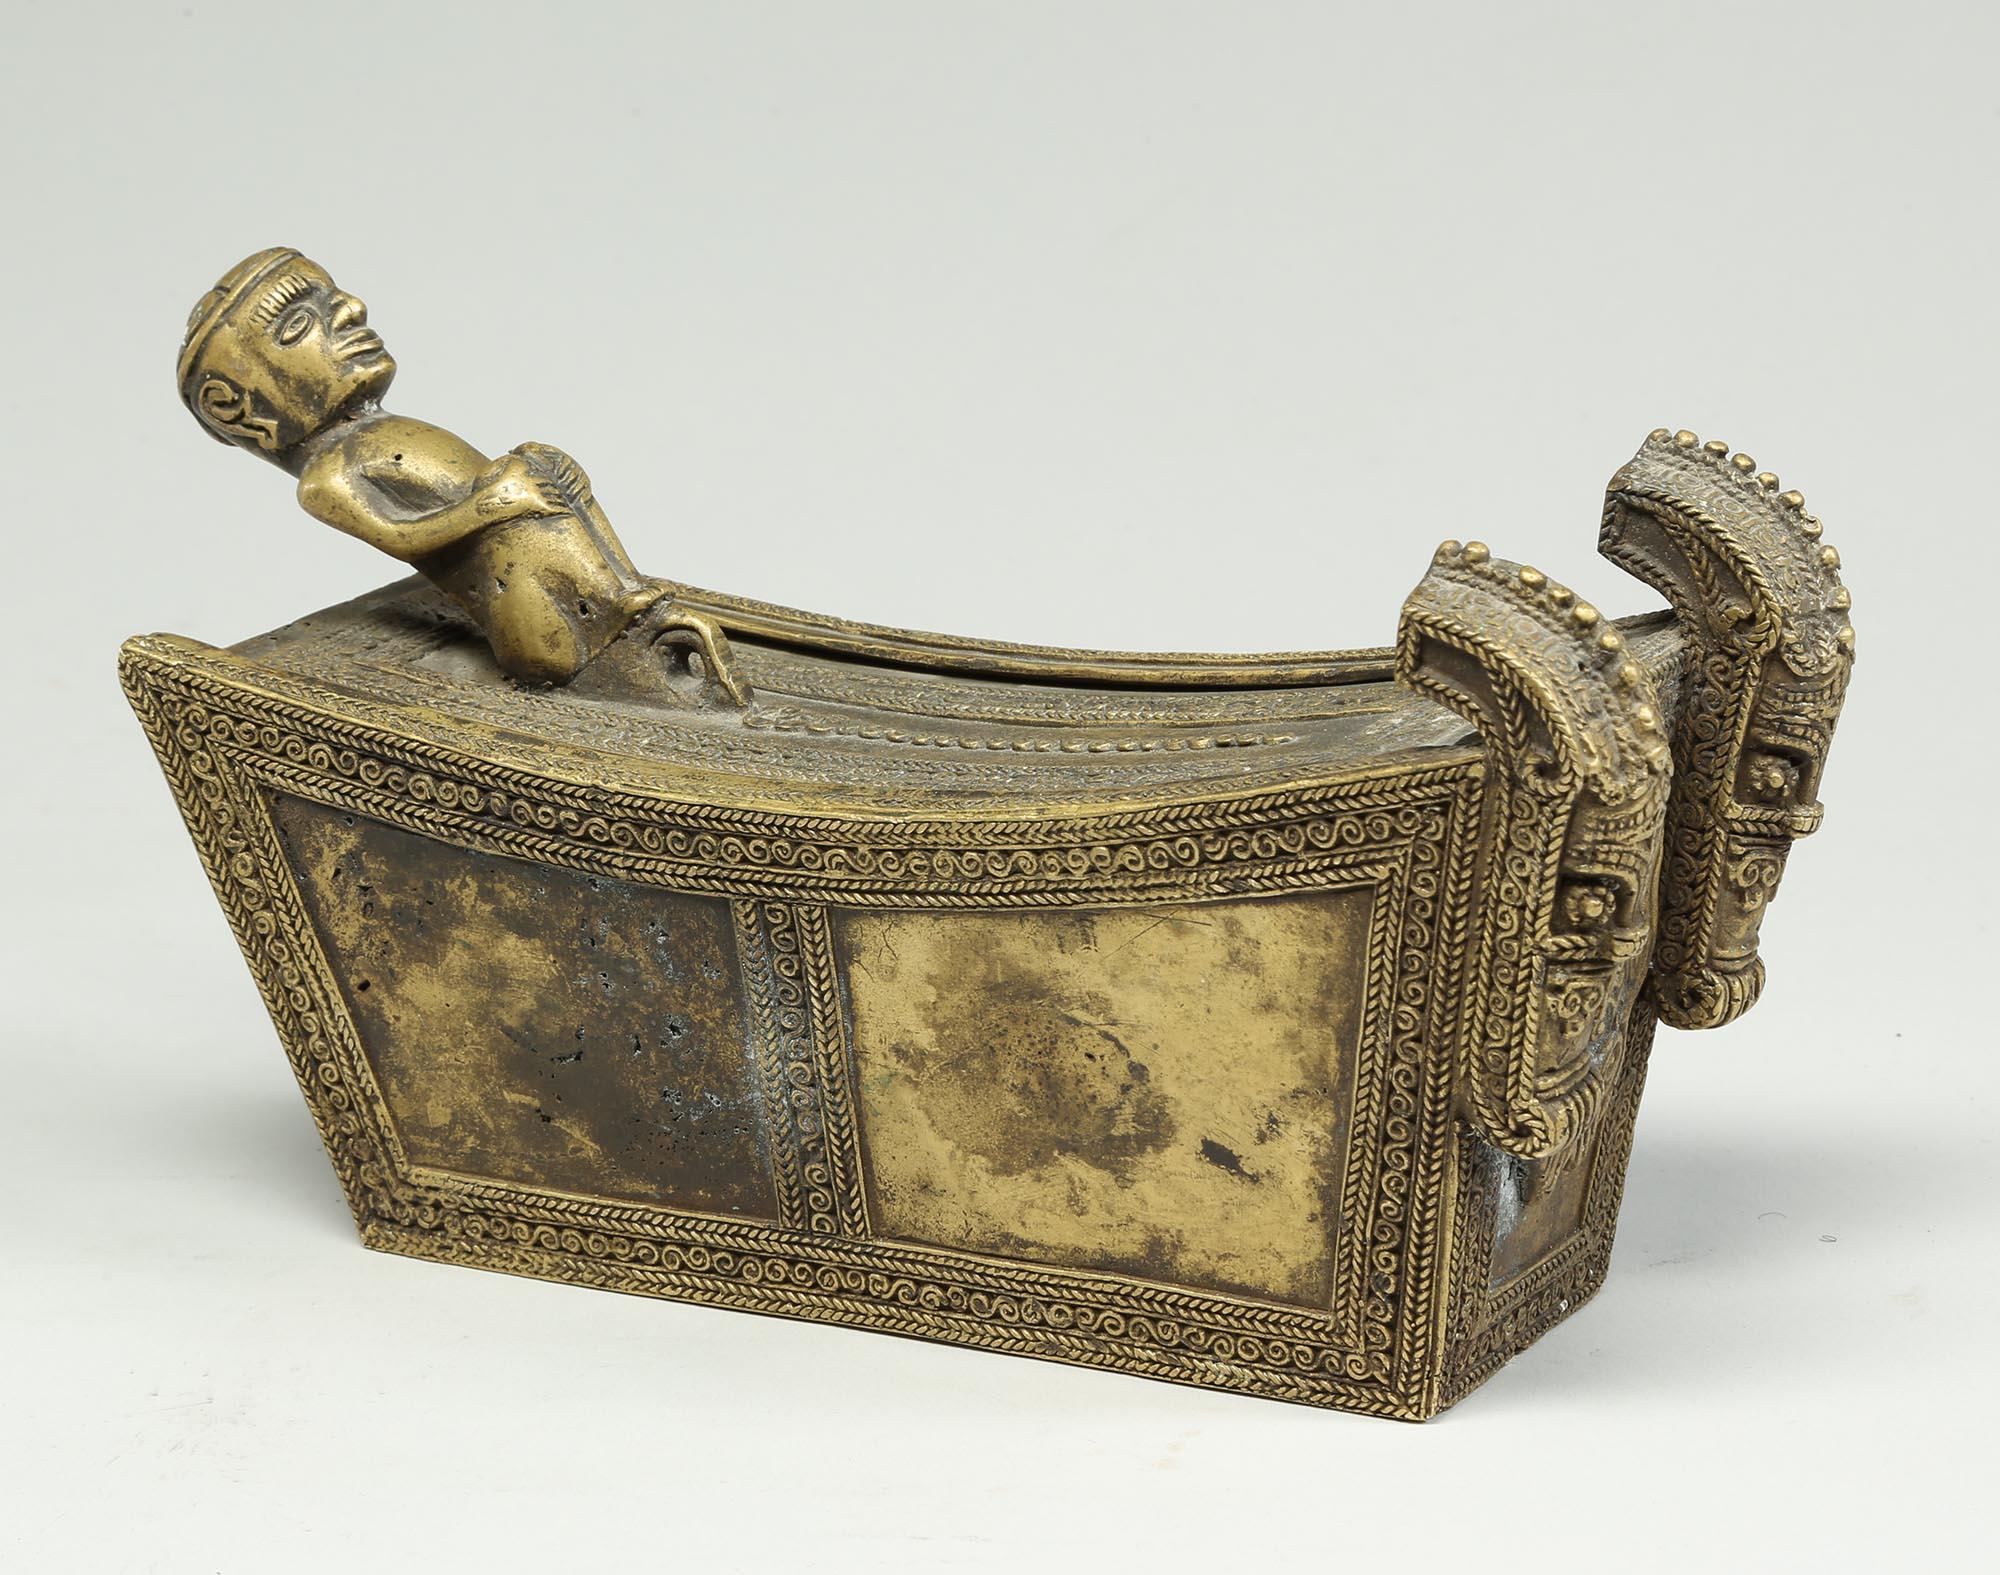 Extremely finely crafted, probably made by the lost wax process, cast bronze small Batak storage box with reclining figure with hands on knees and two protective singas at one end. In the form of a Batak coffin with lots of fine cast designs, early